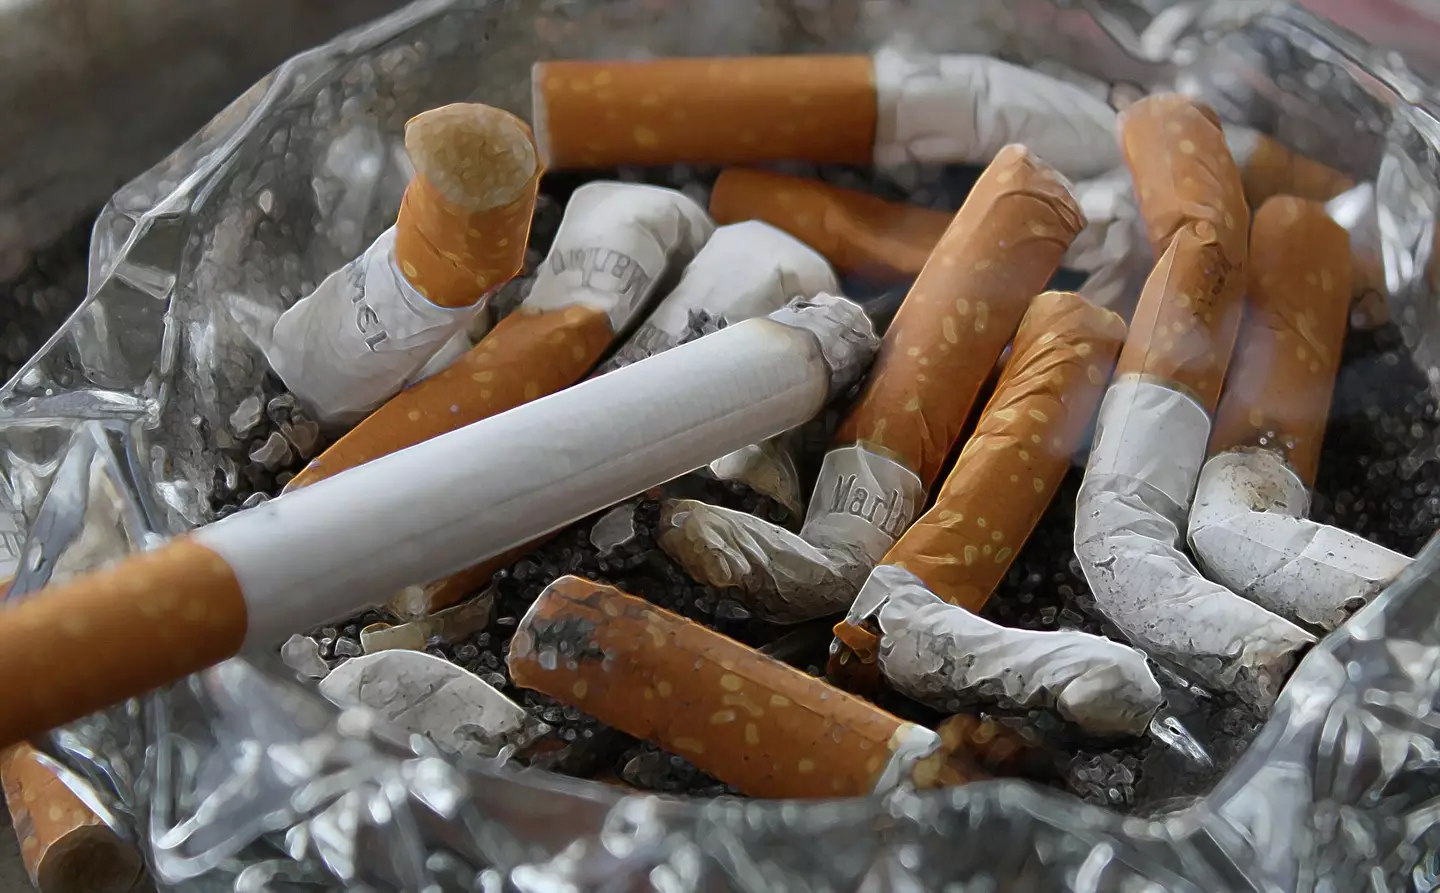 The government is aiming for the UK to be smoke-free by 2030.